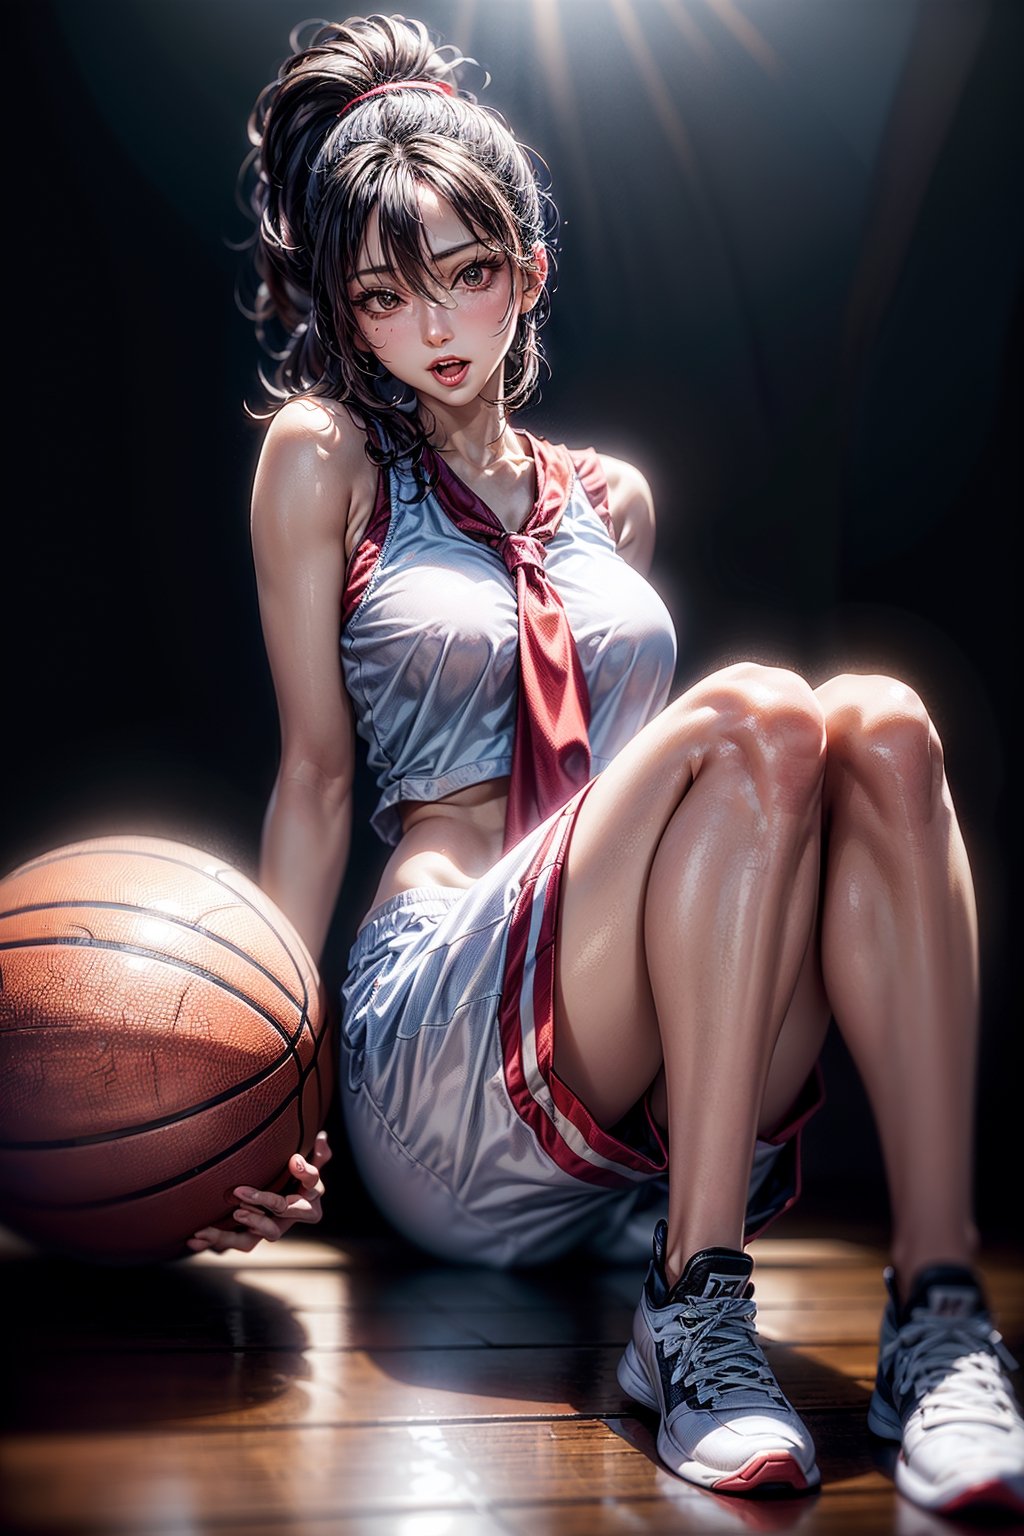 (((1ponytail hair girl:1.3, solo))), (a extremely pretty and beautiful milf:1.3), (22 years old: 1.1), (pointing at you:1.3), (stylish basketball posing:1.3), (open stance:1.3), (dribbling:1.3),  at basketball arena, holding a basketball,spot light ,
break, 
(up-ponytail:1.3), (shiny-black thin hair:1.2), bangs, dark brown eyes, beautiful eyes, princess eyes, bangs, Hair between eyes, short hair:1.3, slender, (gigantic breasts:1.3, sagging breasts:1.3, disproportionate breasts;1.3), (thin waist: 1.3), (detailed beautiful girl: 1.4), Parted lips, Red lips, full-make-up face, (shiny skin), ((Perfect Female Body)), (upper body Image:1.3), Perfect Anatomy, Perfect Proportions, (most beautiful Asian actress face:1.3, extremely cute and beautiful Korean idol face:1.3), (seductive emotion:1.3), (blowjob face:1.3, open mouth:1.3), (4fingers and thumb:1.3), (perfect ratio human hands:1.3), 
BREAK, 
(wearing red +white basketball unifrom:1.3), (sports shorts:1.3), (basketball shoes:1.3), detailed clothes, 
BREAK, 
a basketball arema, basketball, baseketball goal, audience, player, coach, 
BREAK, 
(Realistic, Photorealistic: 1.37), (Masterpiece, Best Quality: 1.2), (Ultra High Resolution: 1.2), (RAW Photo: 1.2), (Sharp Focus: 1.3), (Face Focus: 1.2), (Ultra Detailed CG Unified 8k Wallpaper: 1.2), (Beautiful Skin: 1.2), (pale Skin:1.3), (Hyper Sharp Focus: 1.5), (Ultra Sharp Focus: 1.5), (Beautiful pretty face: 1.3), (super detailed background, detail background: 1.3), Ultra Realistic Photo, Hyper Sharp Image, Hyper Detail Image, ,Indoor Grey